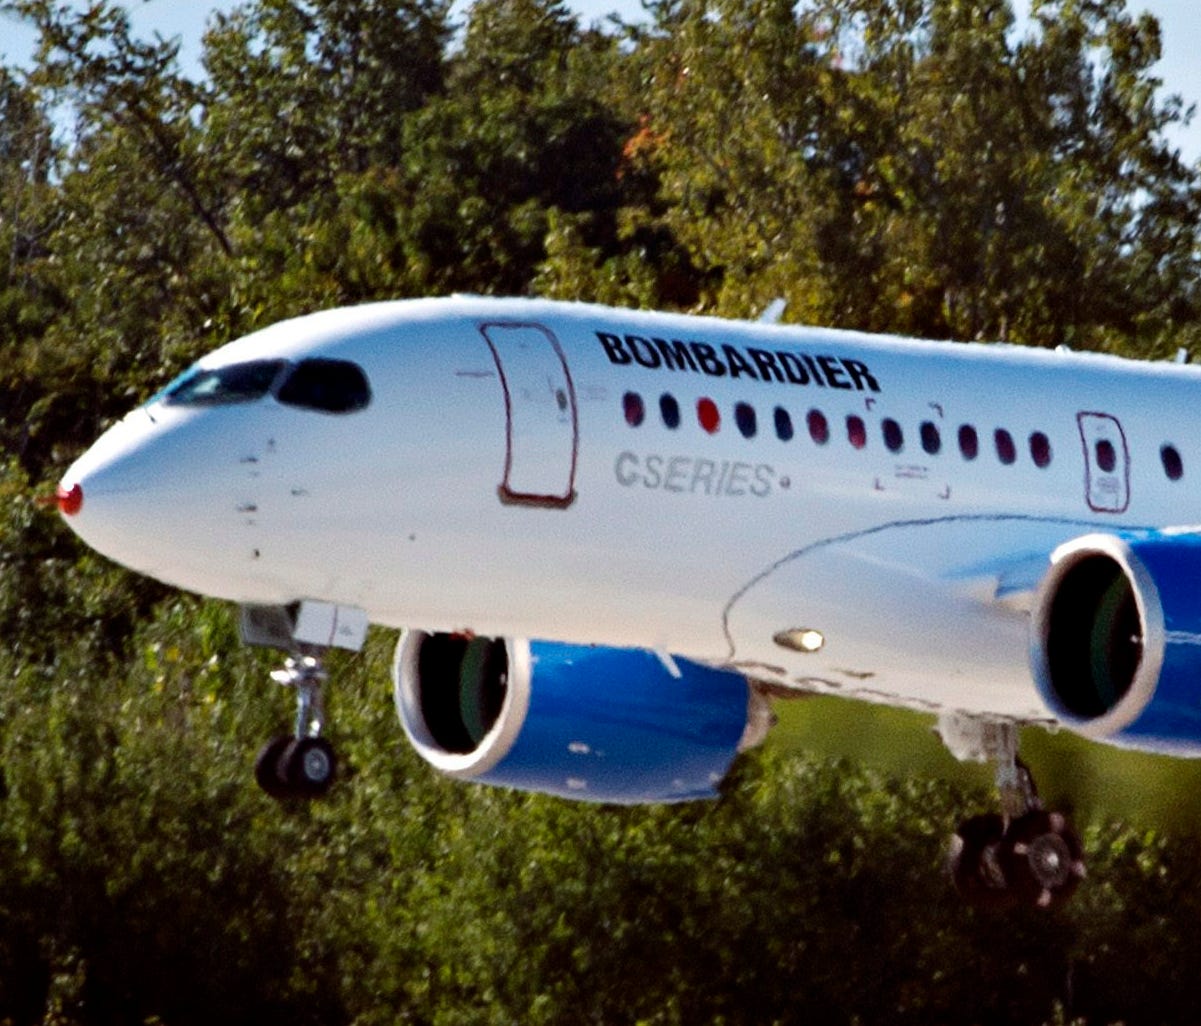 Bombardier's new CSeries jetliner takes off on its maiden flight on Sept. 16, 2013, in Mirabel, Quebec.